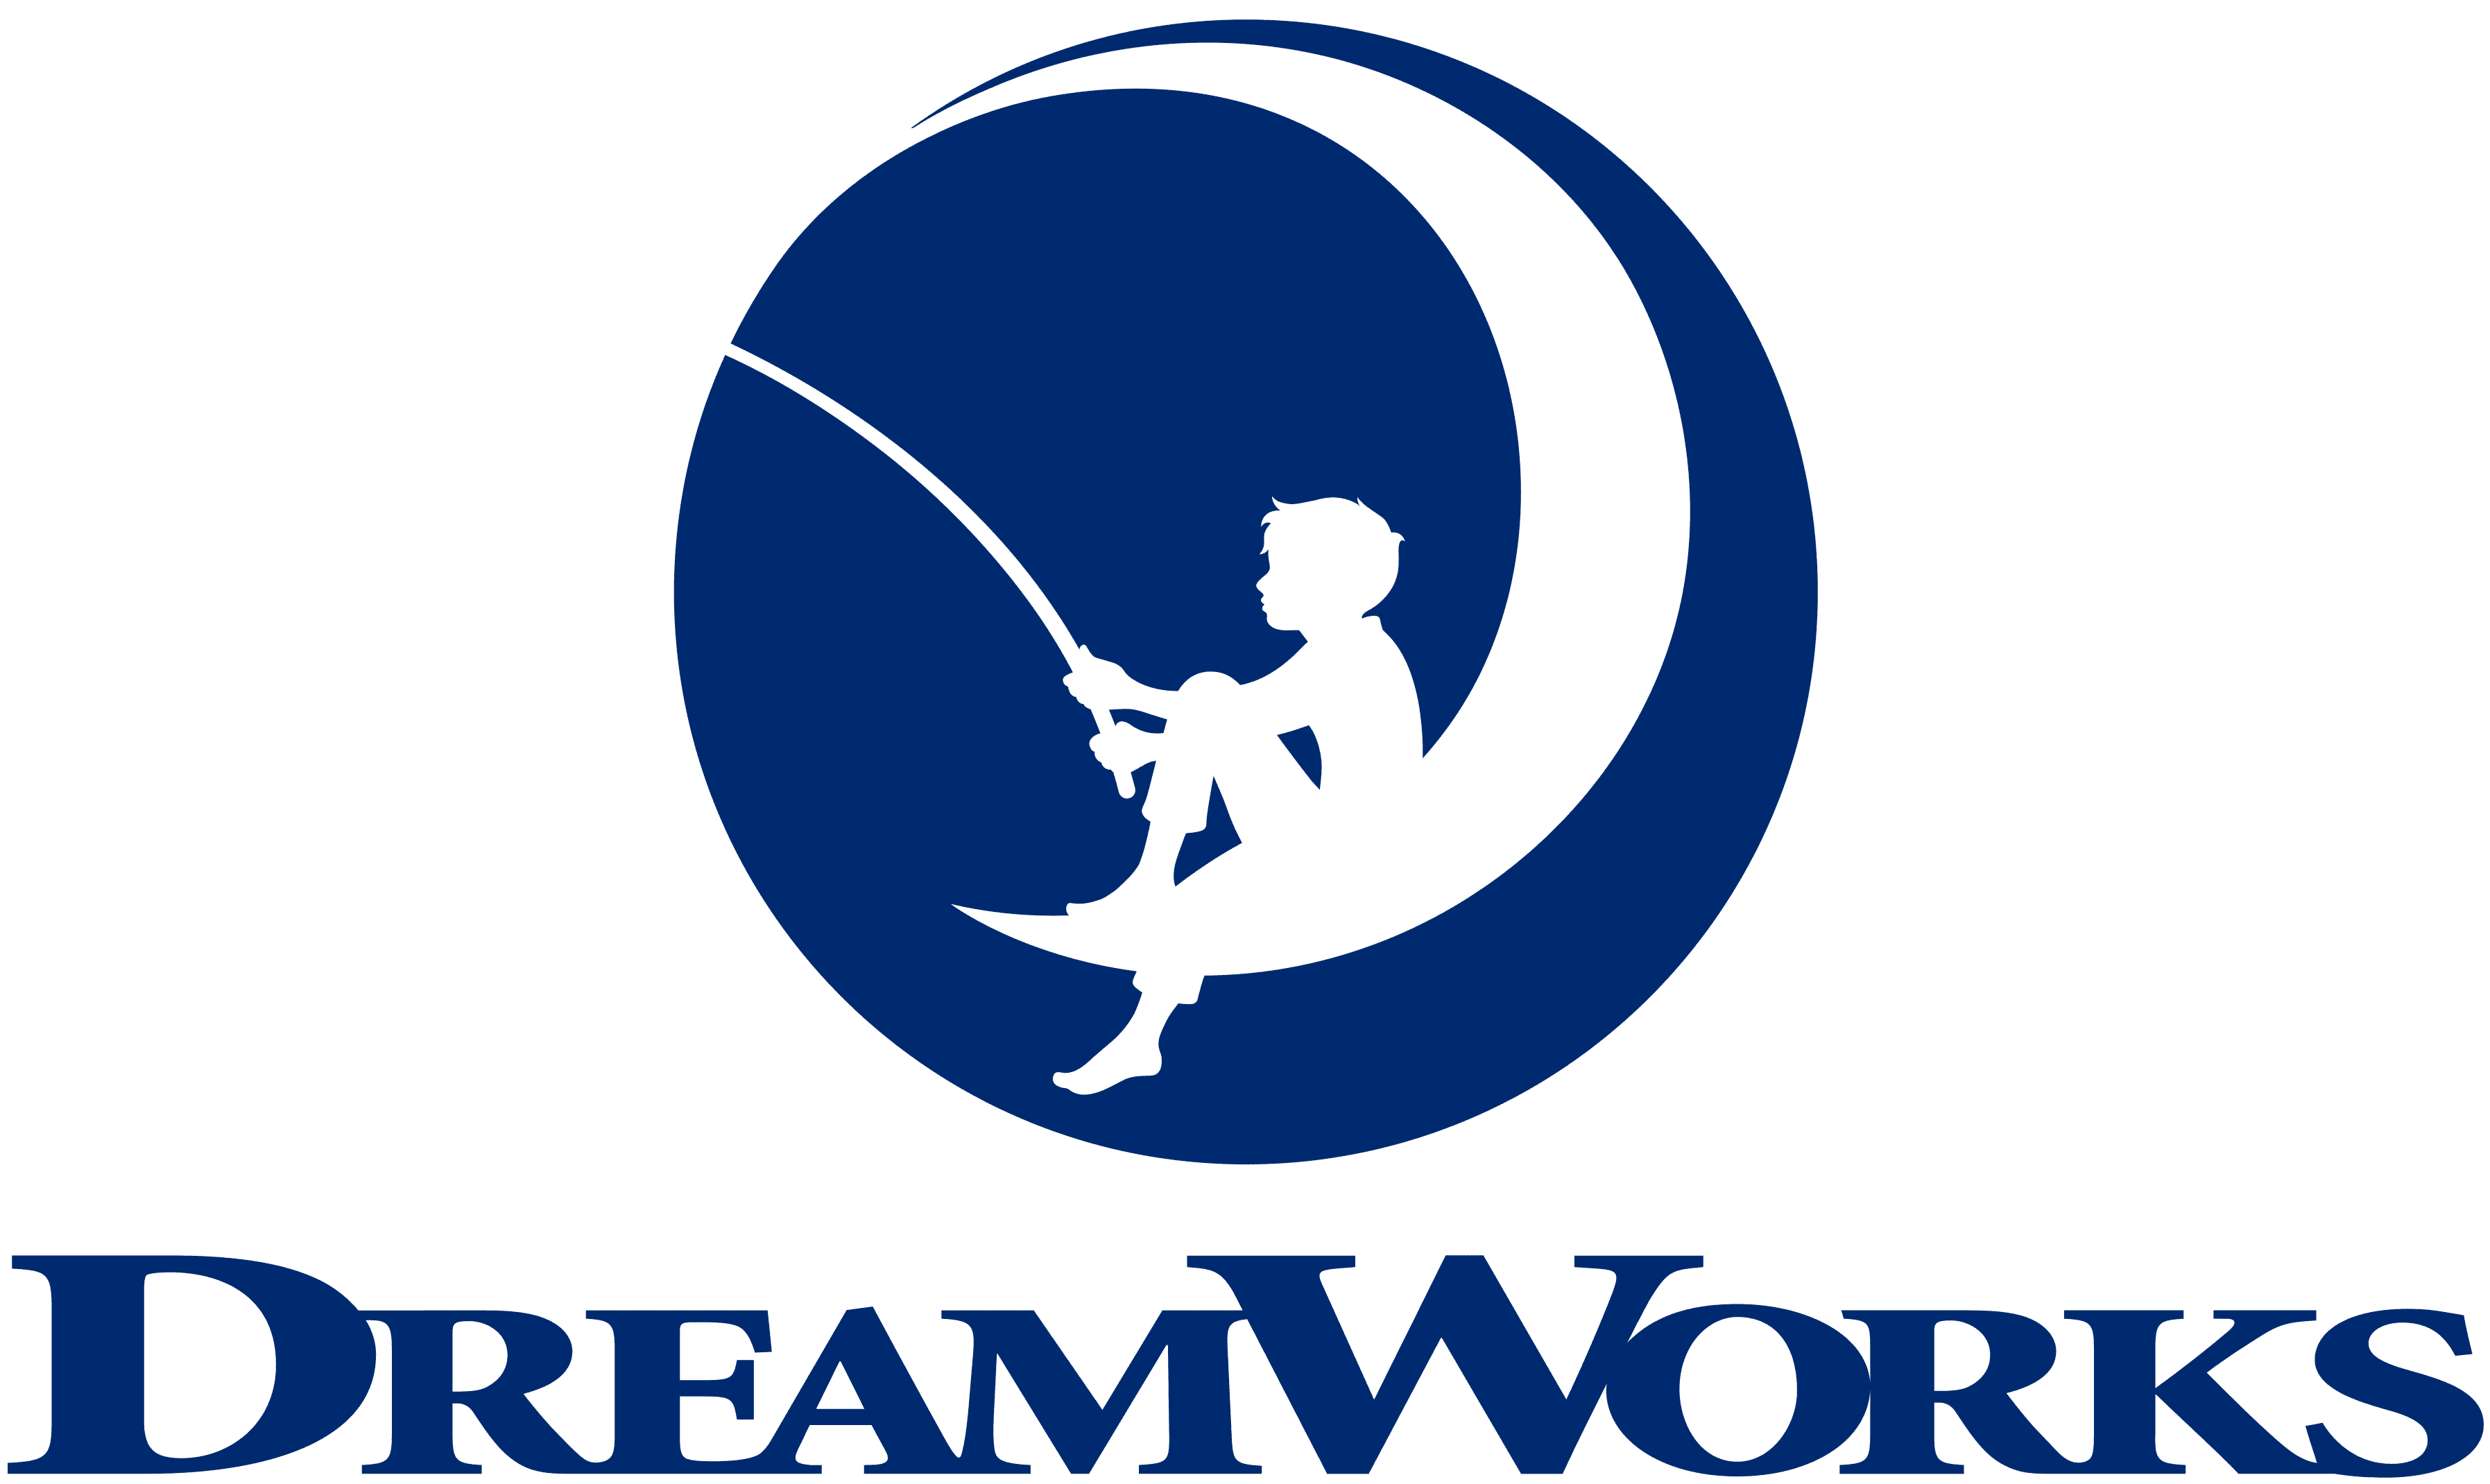 image of the Dreamworks logo